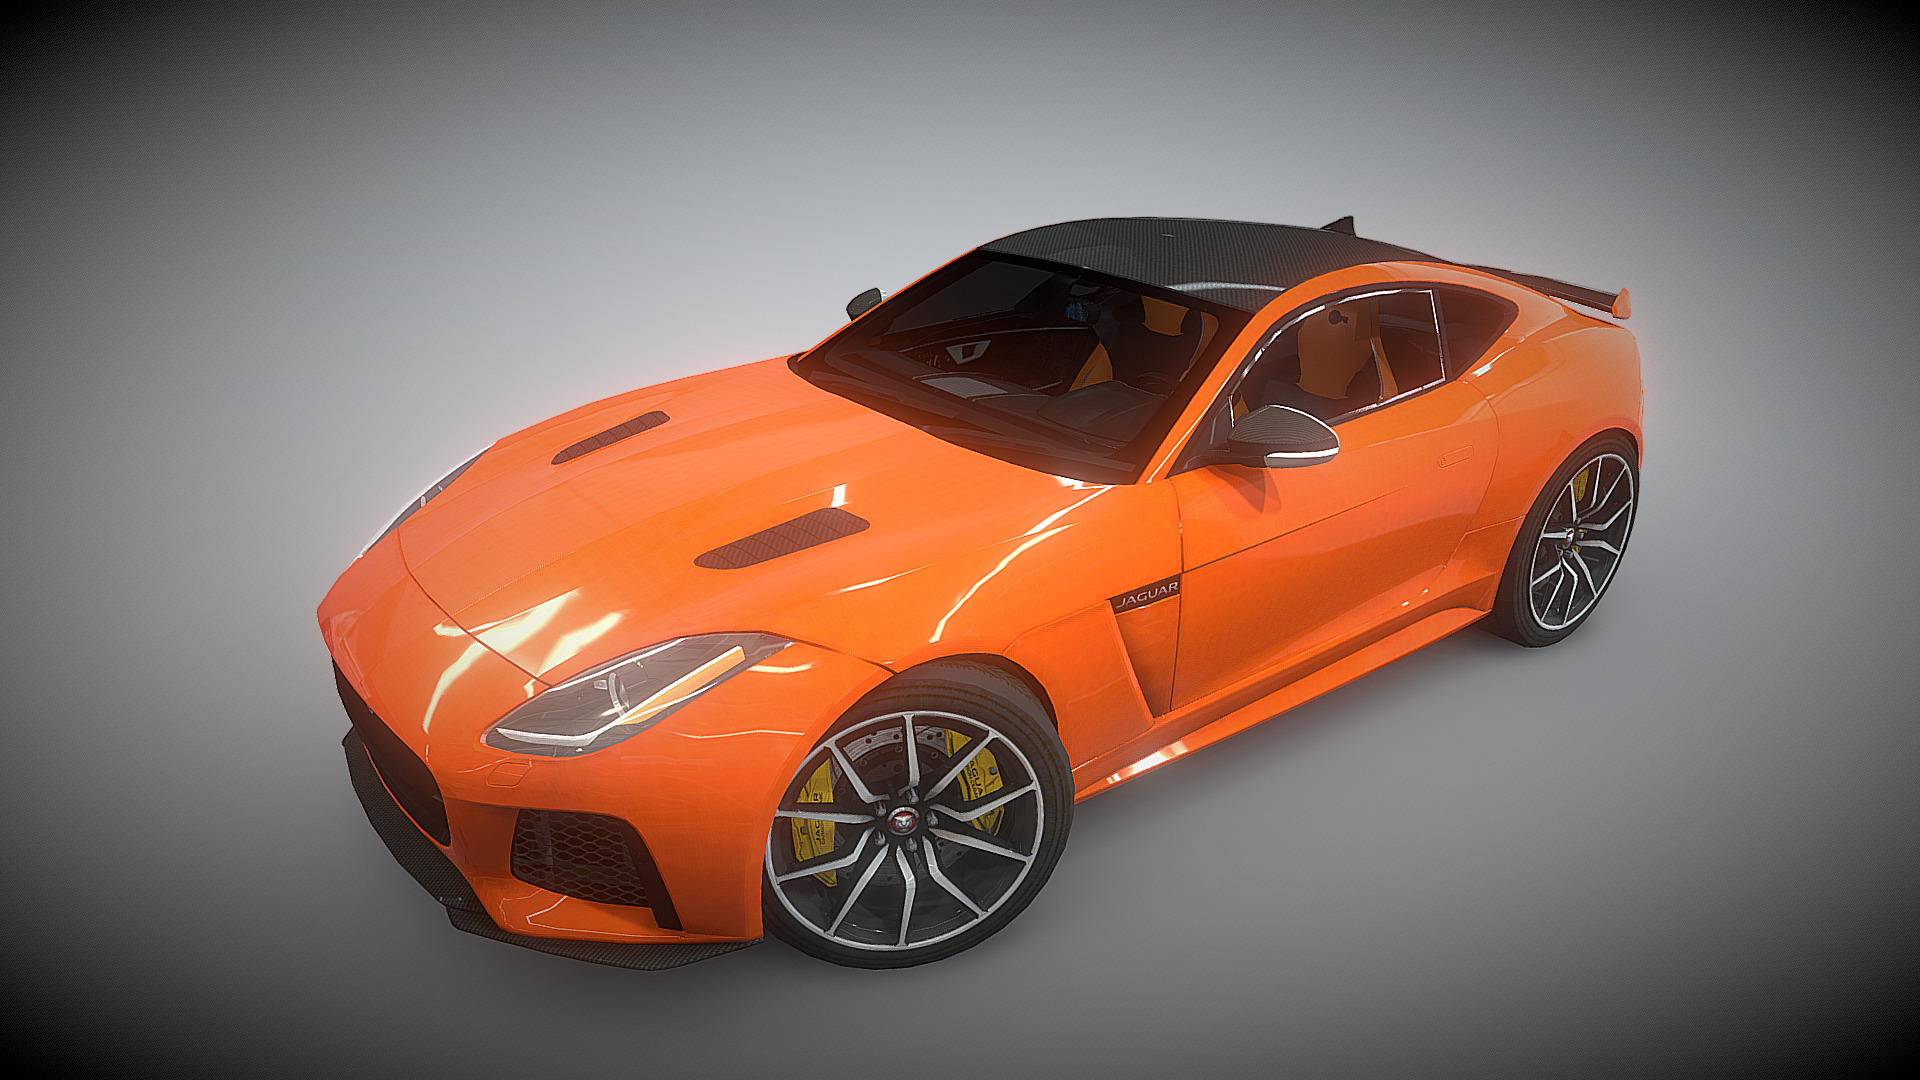 Jaguar F-Type SVR 2016 Edition

The power of reuseable assets/textures

VR Ready&hellip; This model i actually literally gave a shit to complete it
Dont Ask for free downloads, it will never happen! - Jaguar F-Type SVR 2016 Edition - 3D model by OGL (@GaryLim) 3d model